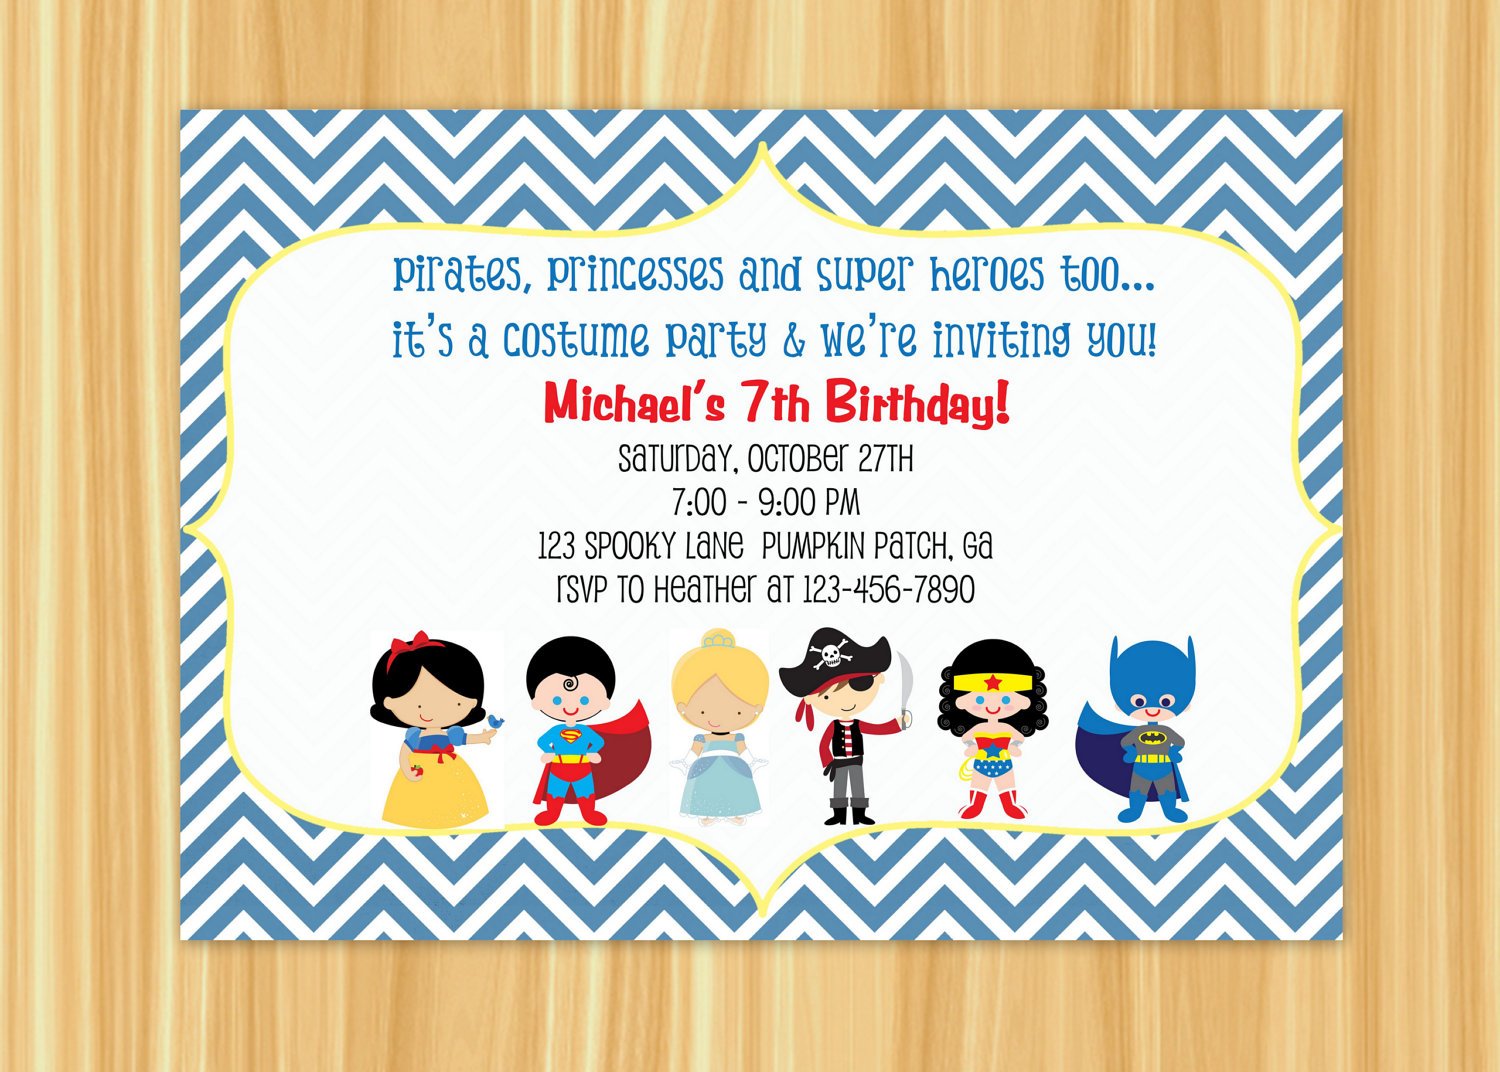 Customized Party Invitations